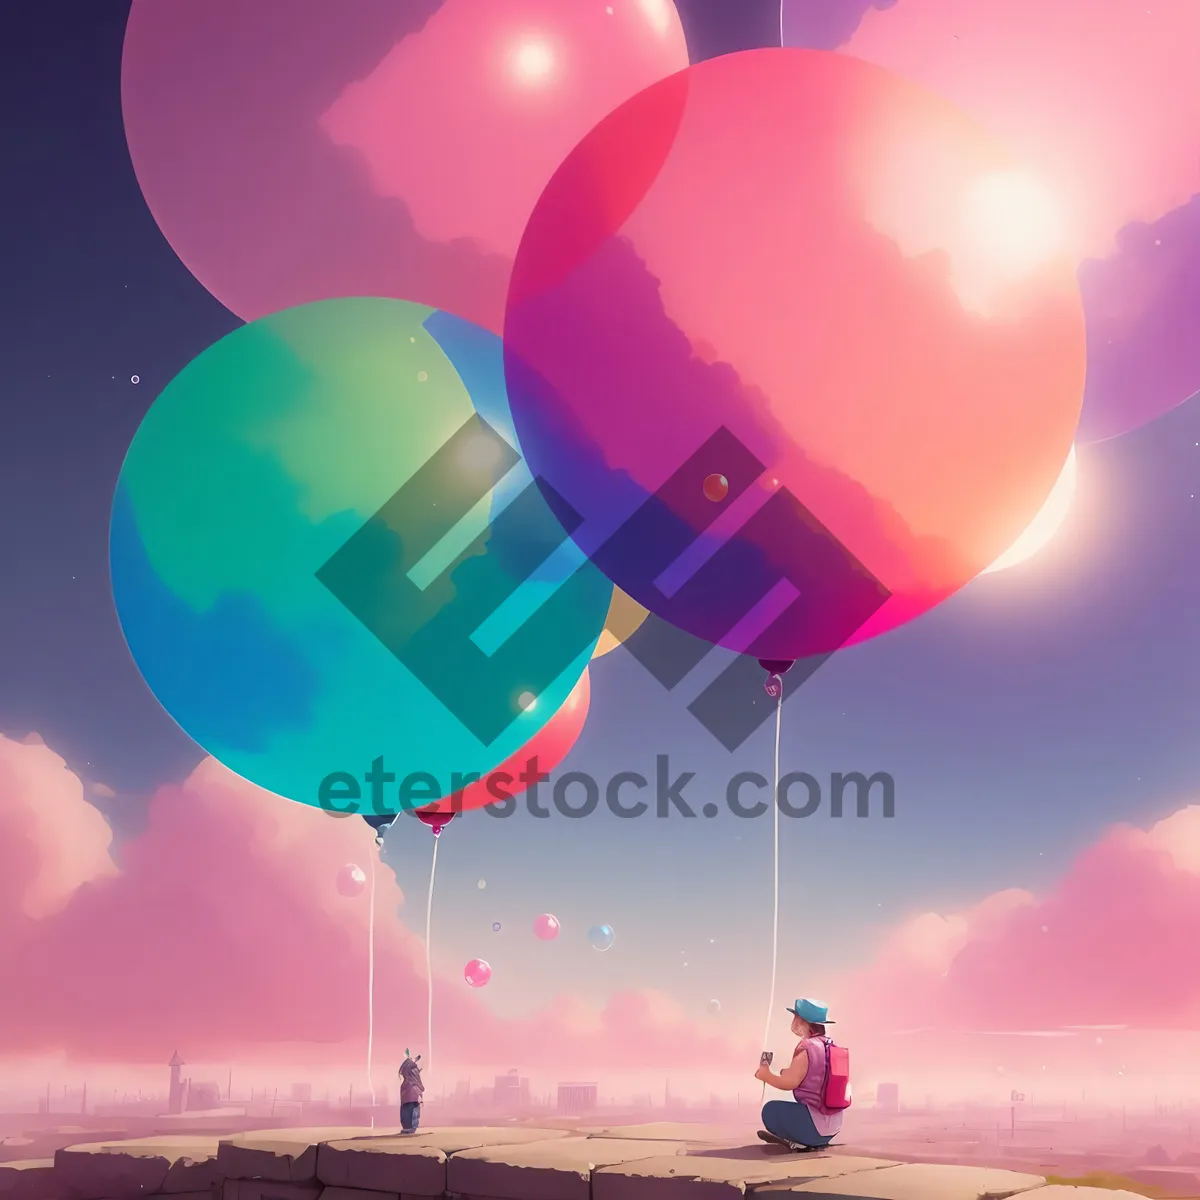 Picture of Colorful Birthday Balloon Decorations in the Sky